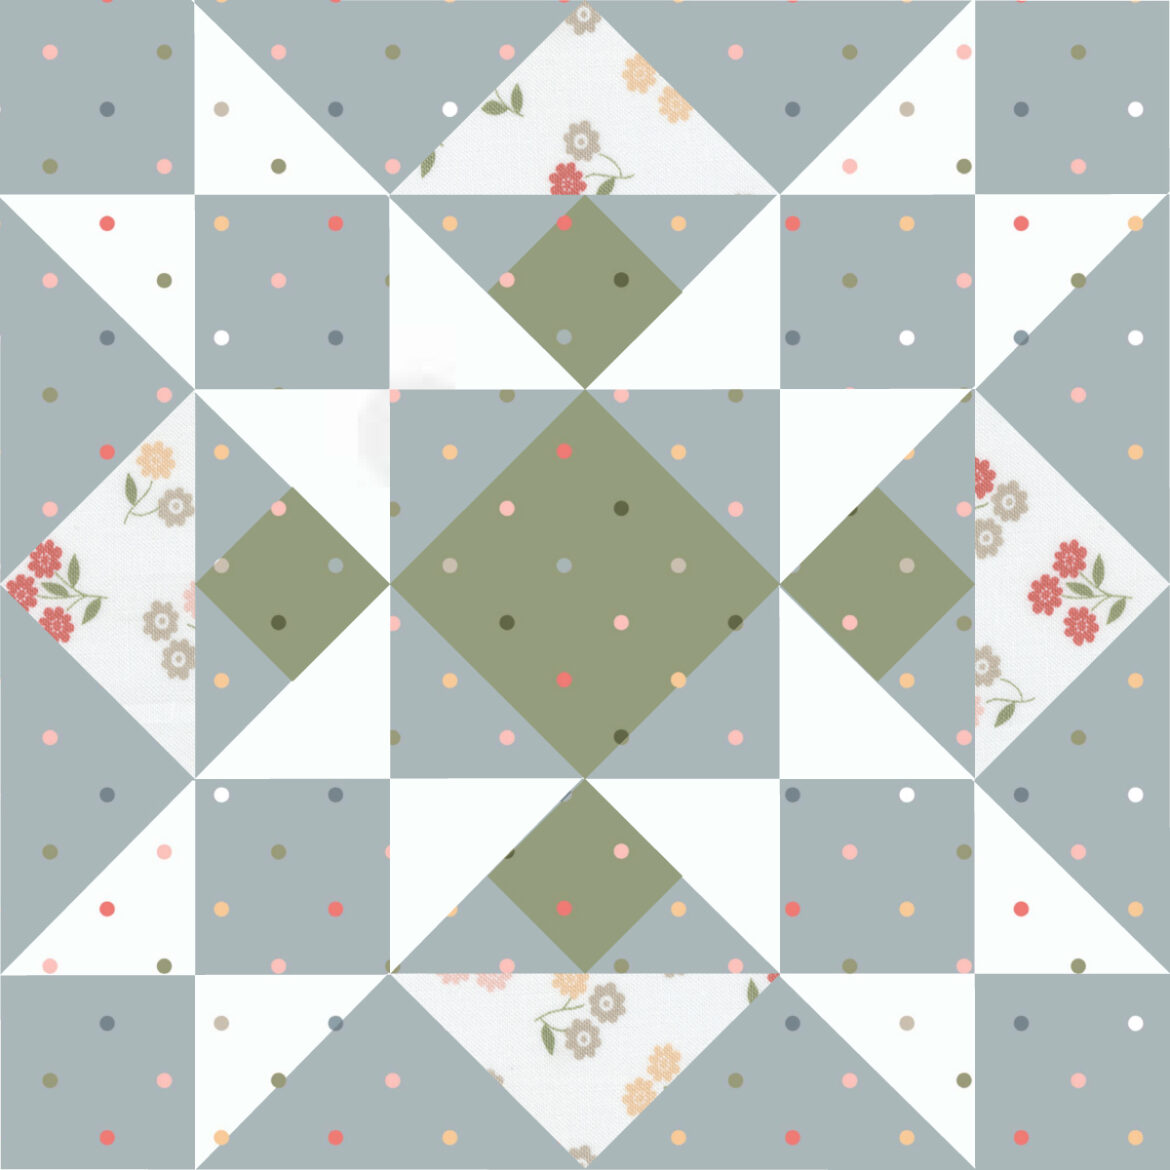 Sewcialites 2 free block of the week. Block 16 is "Christmas Star" by Corey Yoder. Fabric is Country Rose by Lella Boutique for Moda Fabrics. Download the free block pattern now.